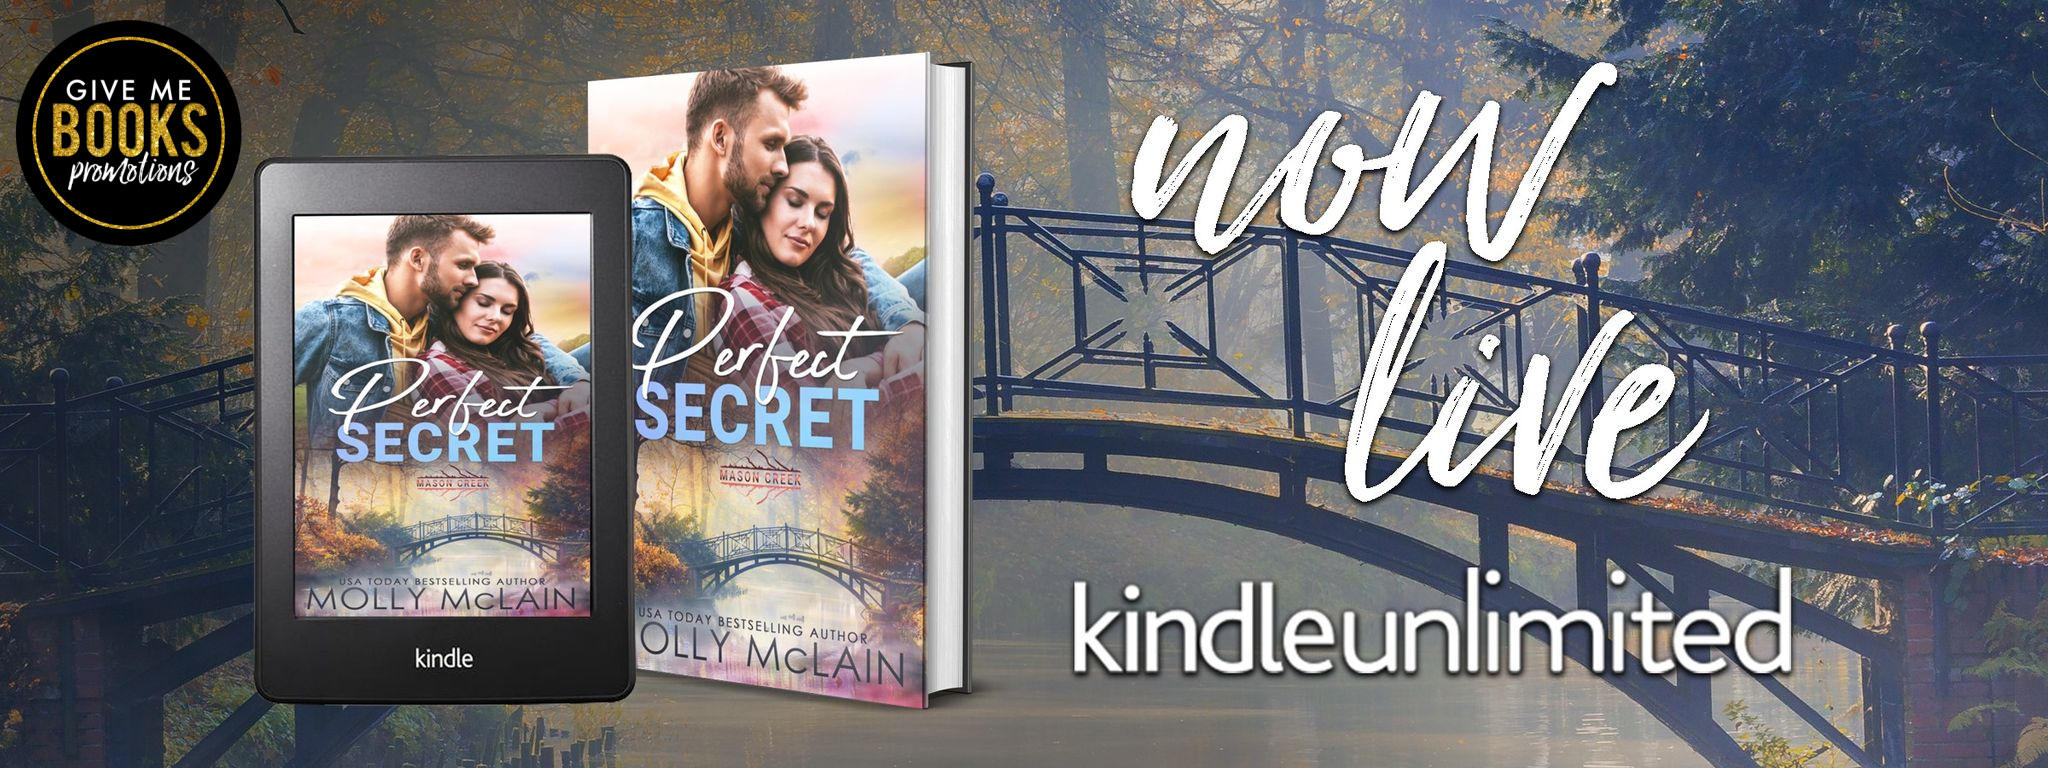 Always Reading: Release Blitz: Perfect Secret by Molly McLain